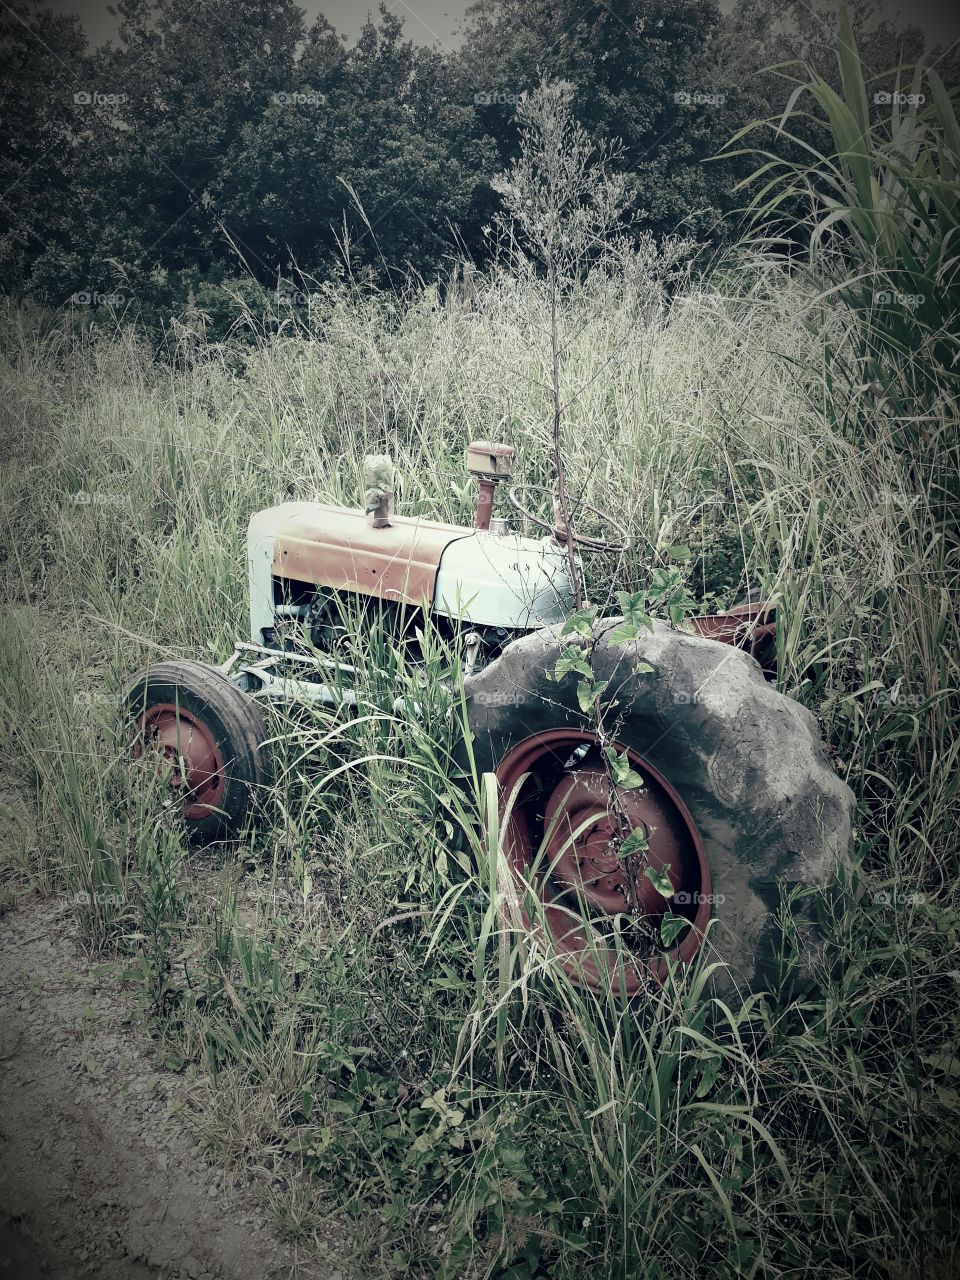 Tractor on the Farm